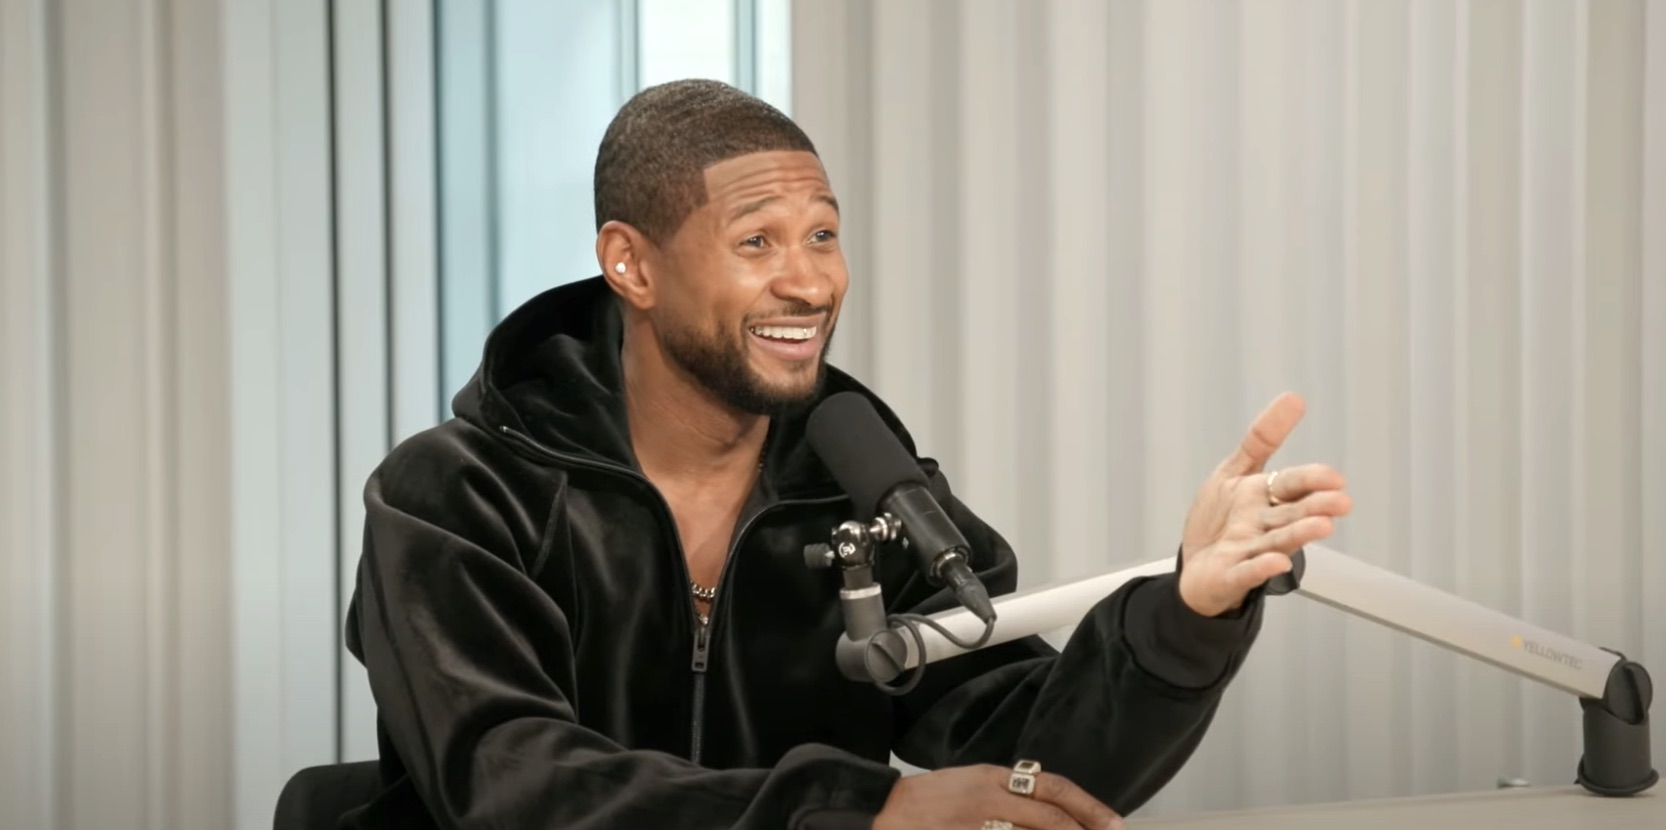 Usher Says Super Bowl Show is “Going to Be a Moment” / Spills on Surprise Guests, Day He Got the Call, & New Album ‘Coming Home’